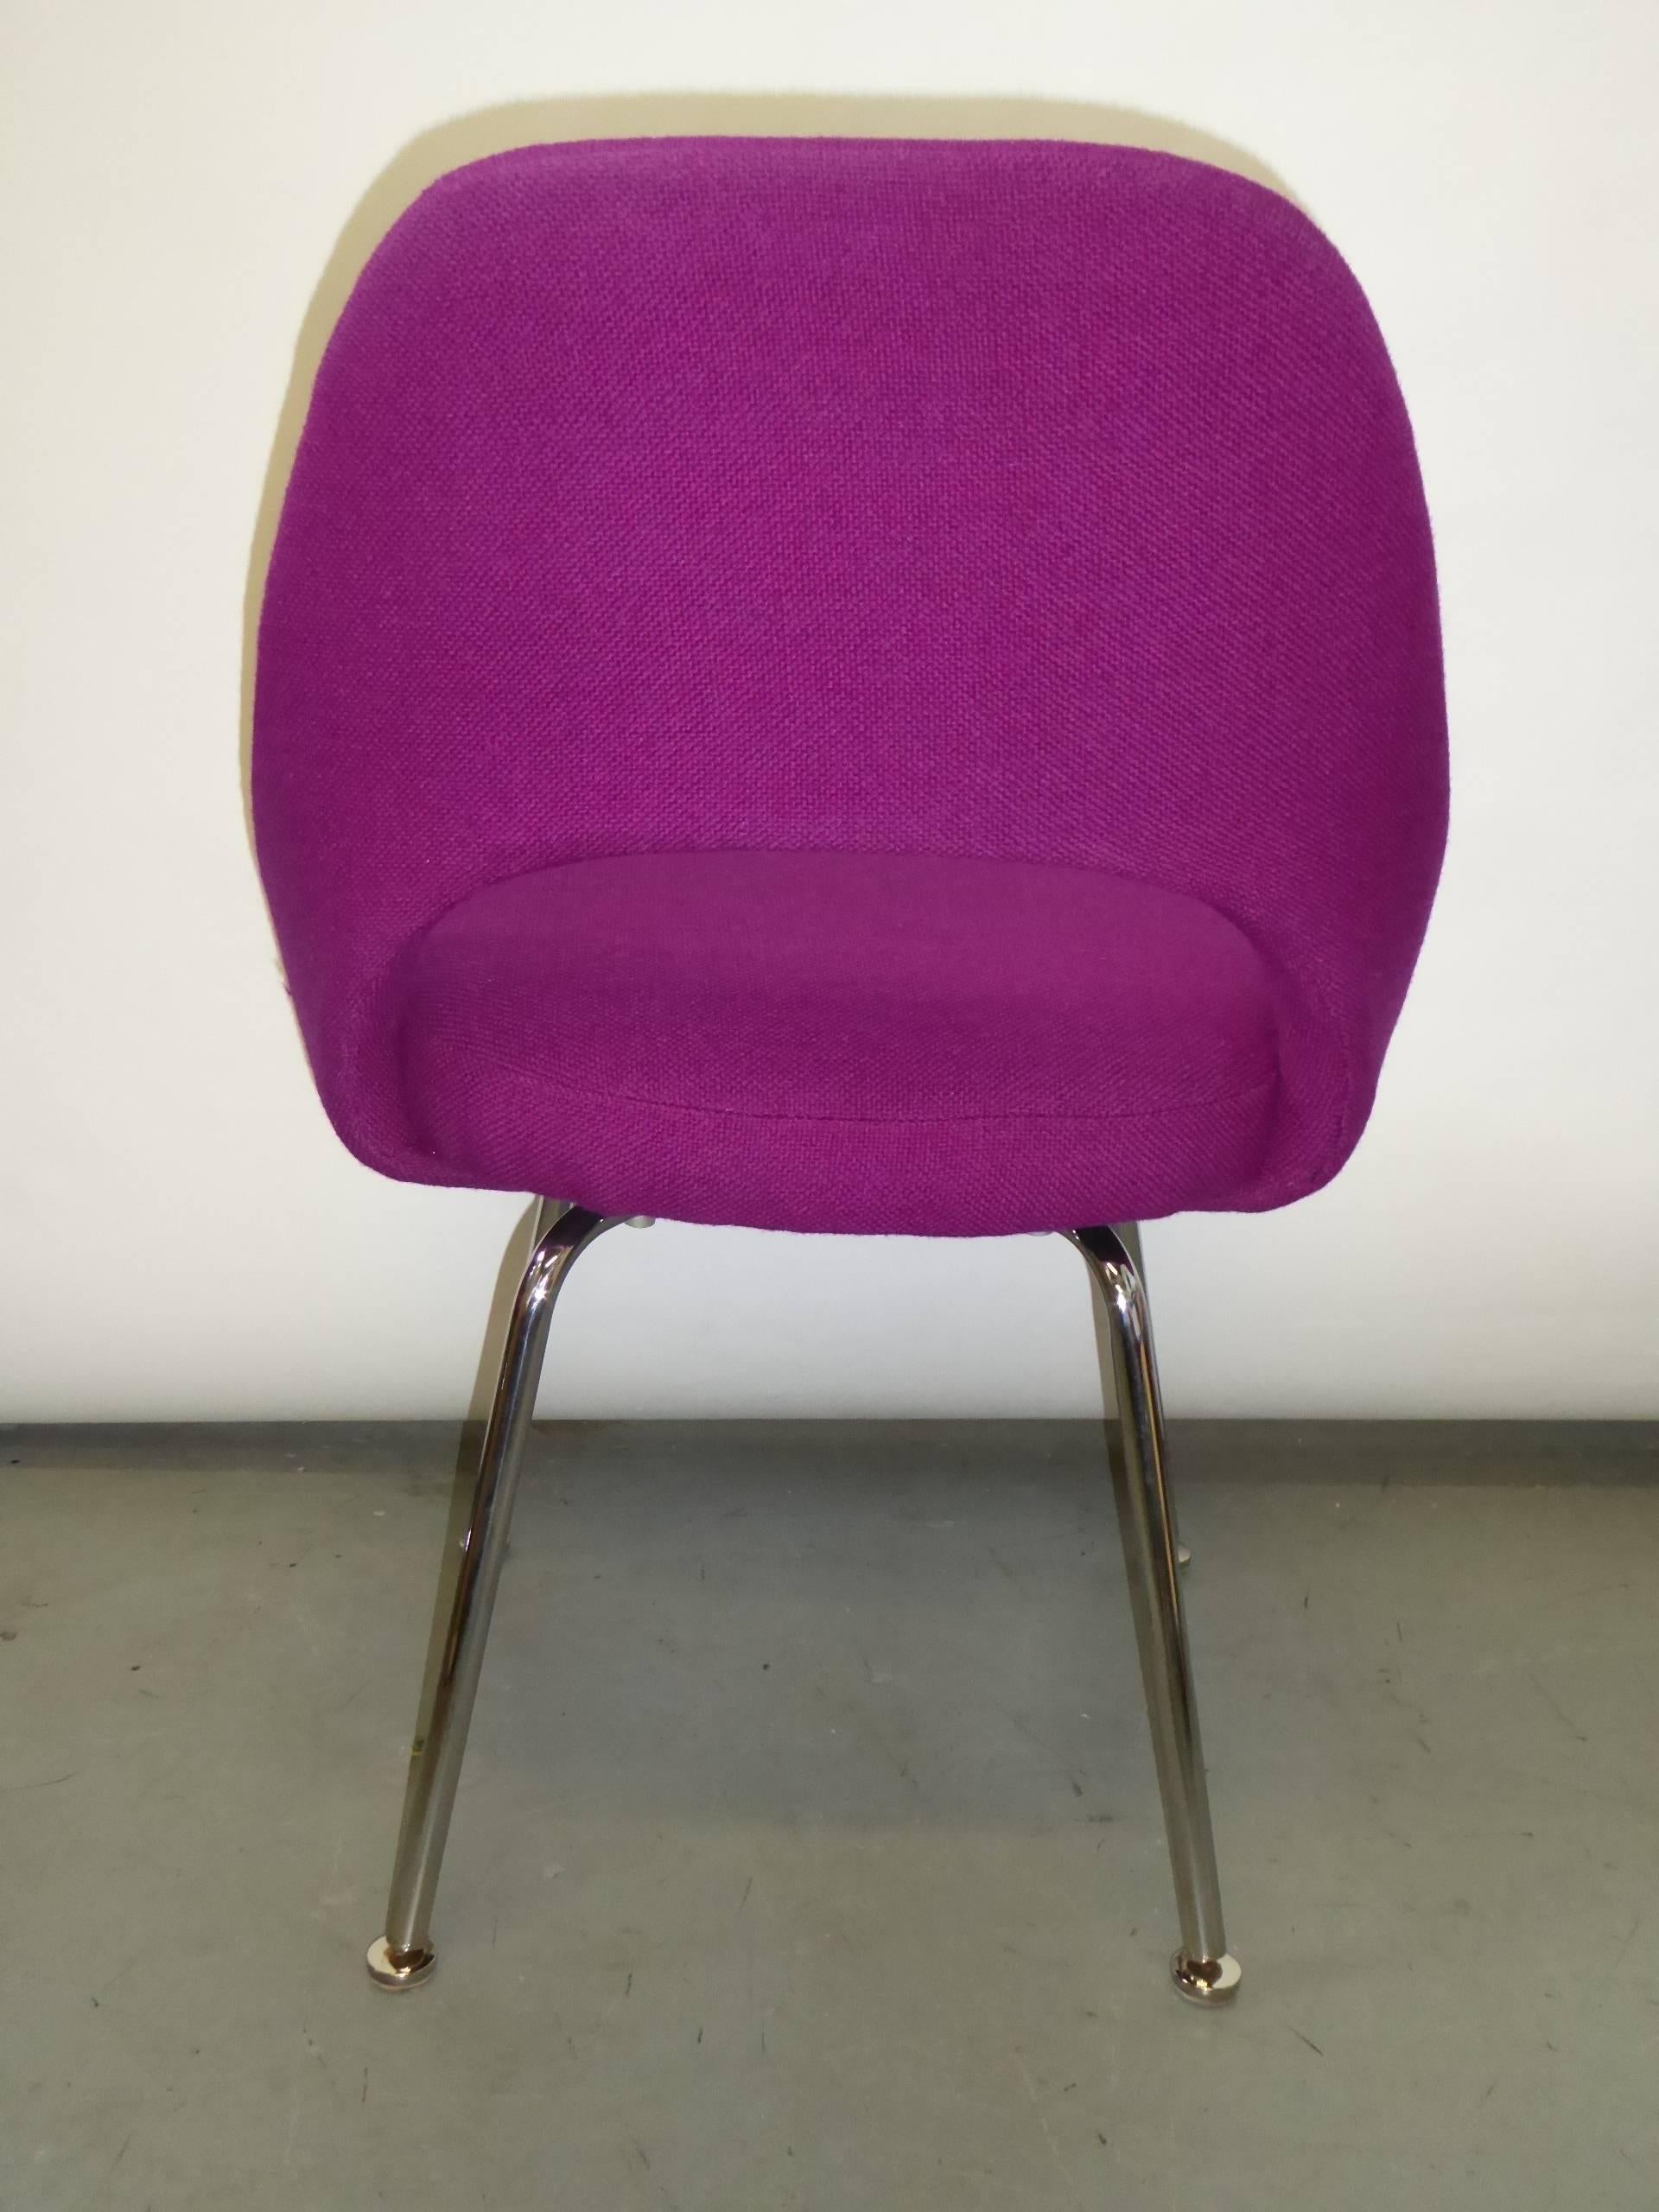 FOUR 1950s Saarinen No. 71 Series Chairs for Knoll 2